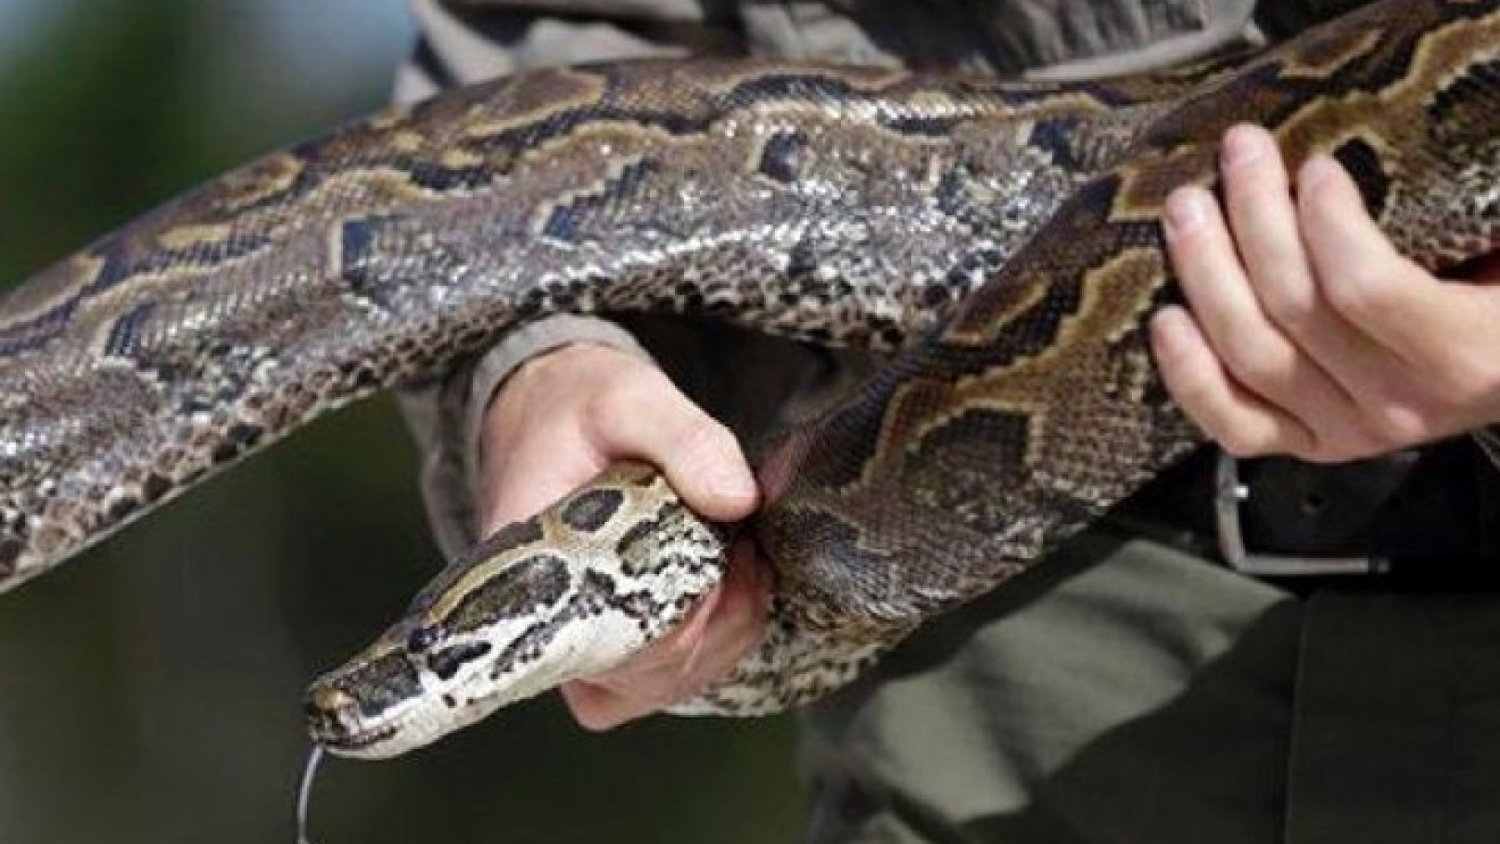 Villagers launched a search for a woman who went missing on Thursday but were horrified to find a bloated snake; upon cutting it open they found the woman's body  (iStock)